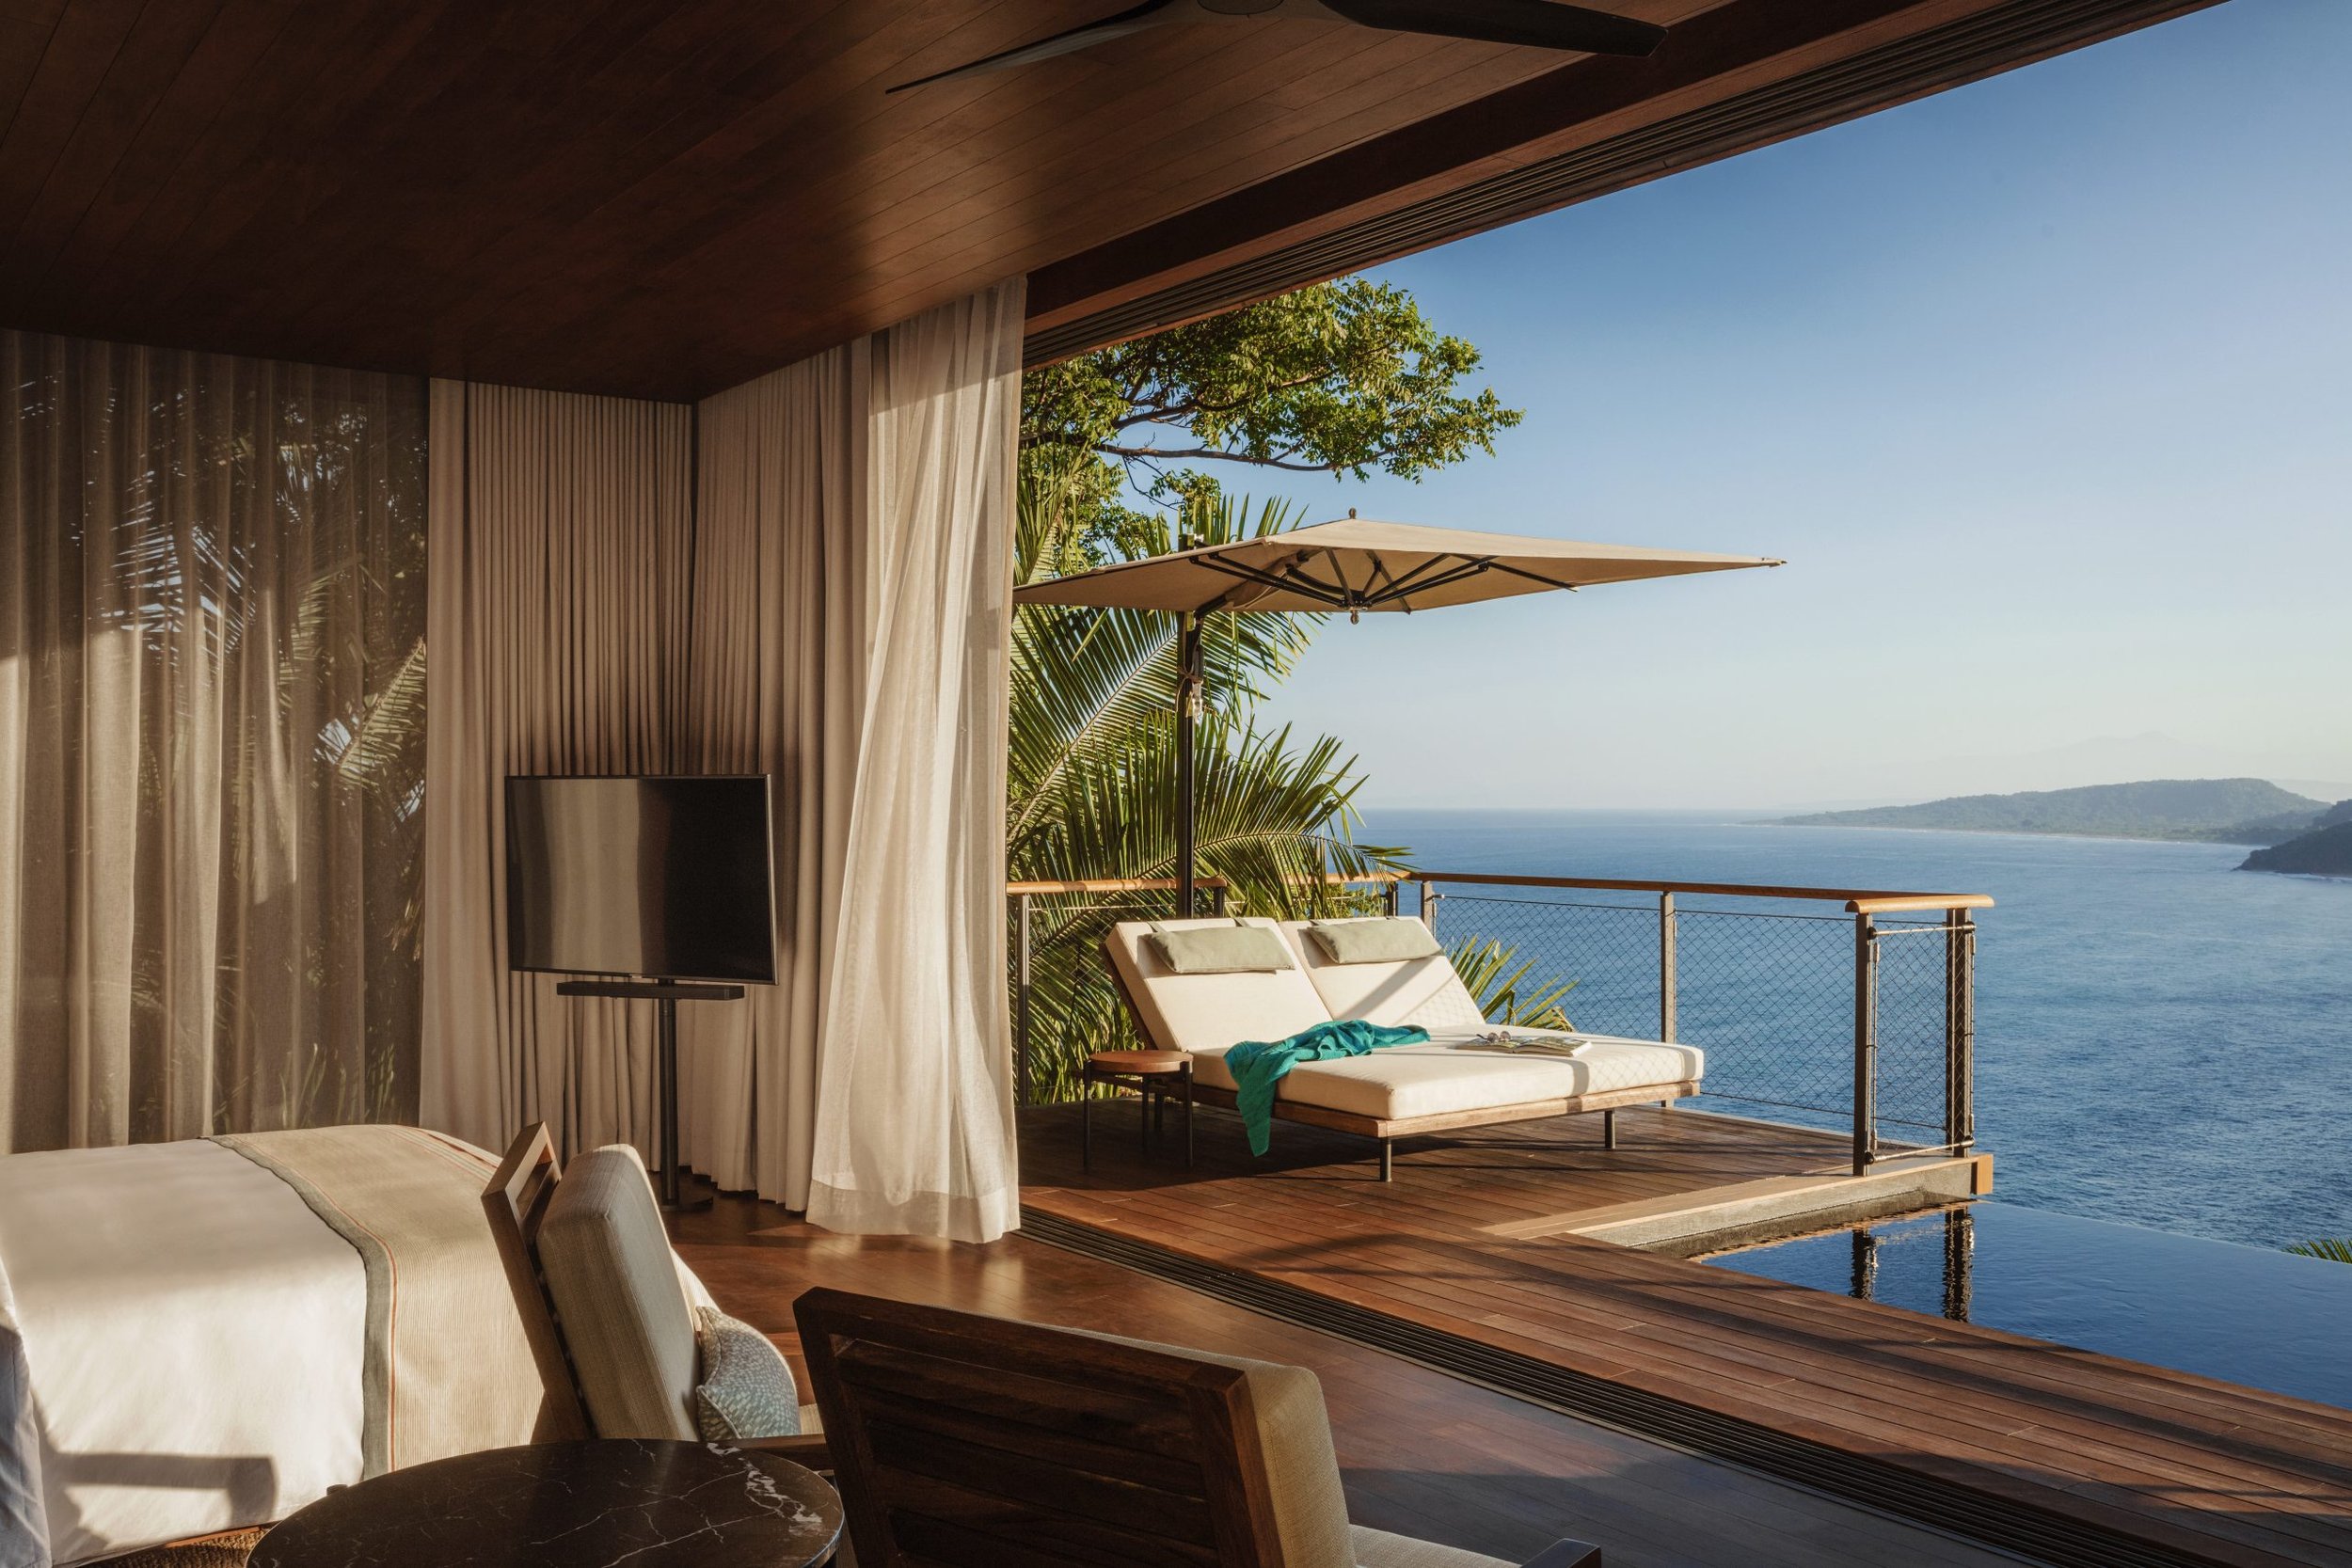 OneOnly_Mandarina_Accommodation_Panoramic_Ocean_Treehouse_Seating_Sunbeds_View_1930_MASTER-scaled.jpg